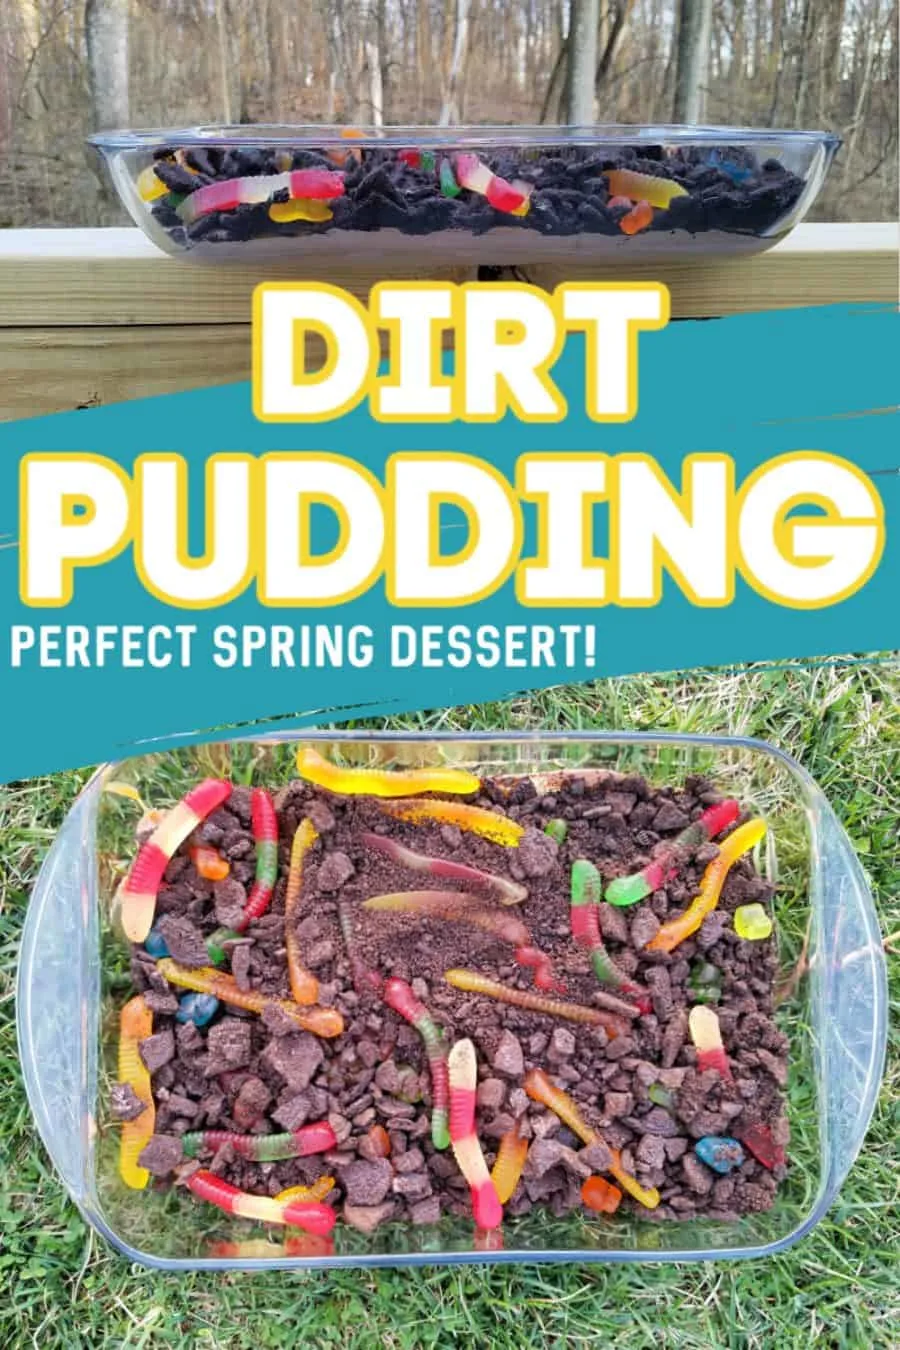 Dirt Pudding Recipe with a text overlay that says "dirt pudding - perfect for spring dessert"